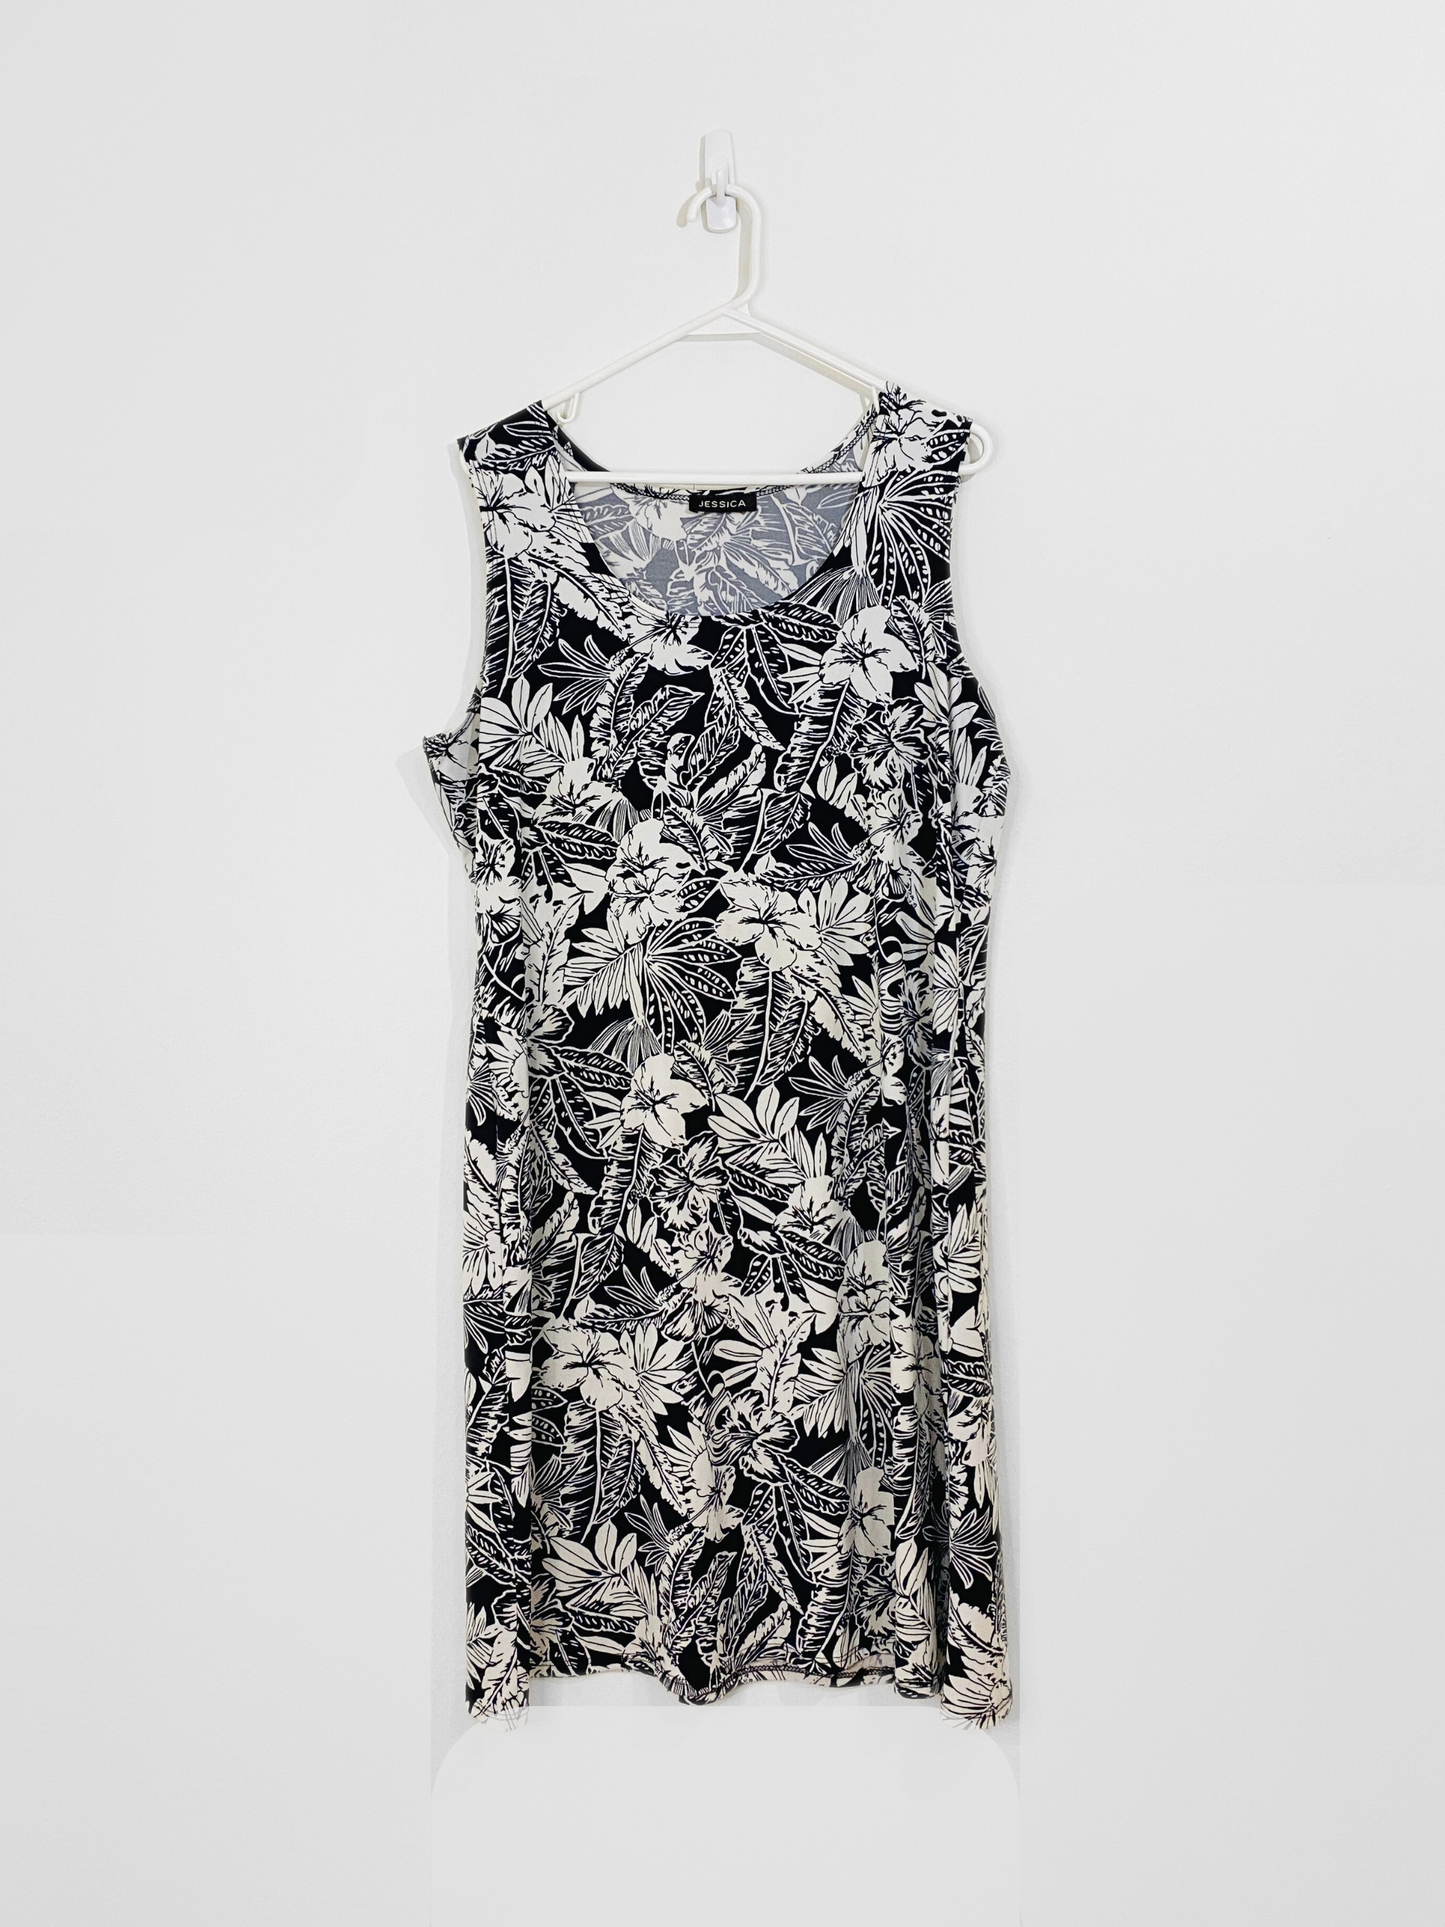 Black and White Floral Dress (X)